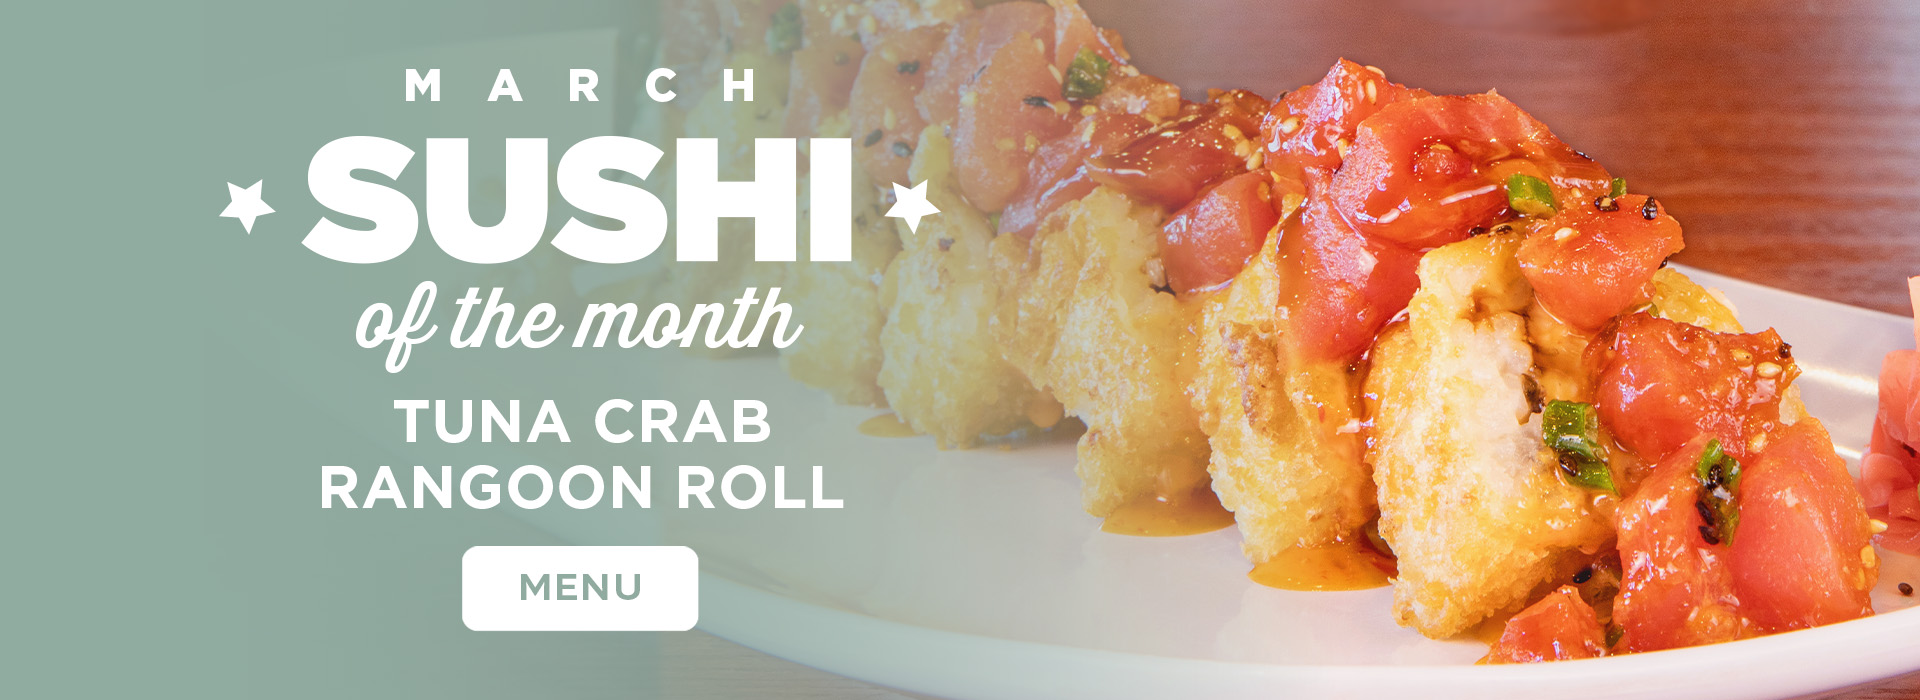 Click or tap here to view our sushi of the month!